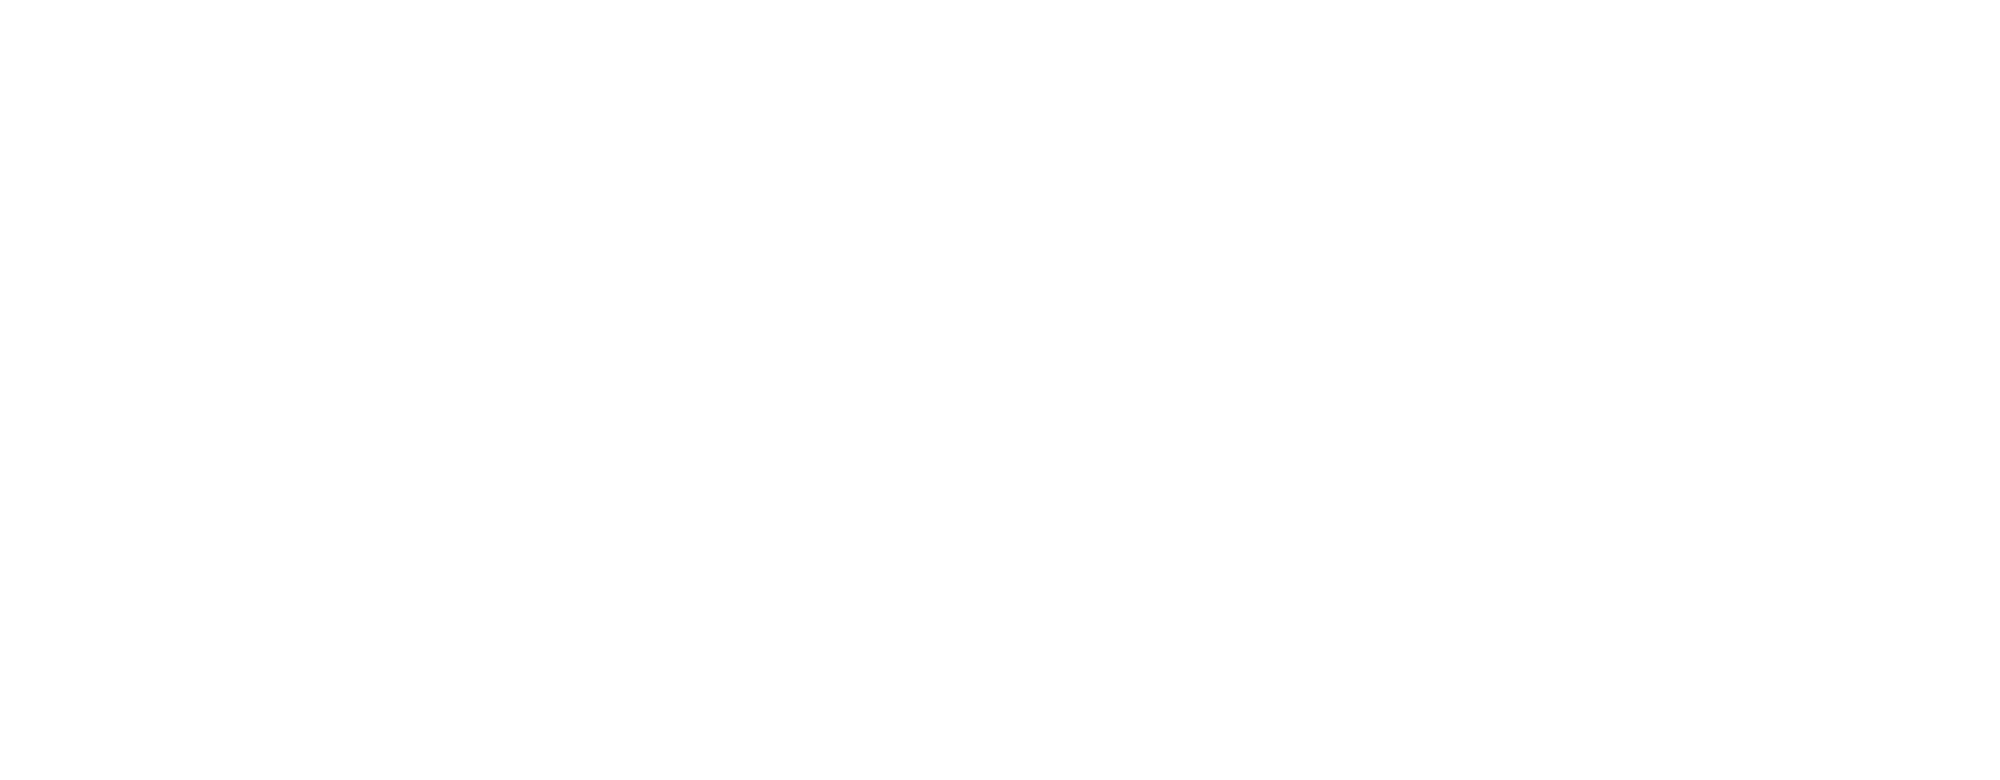 CONTACT/RESERVE